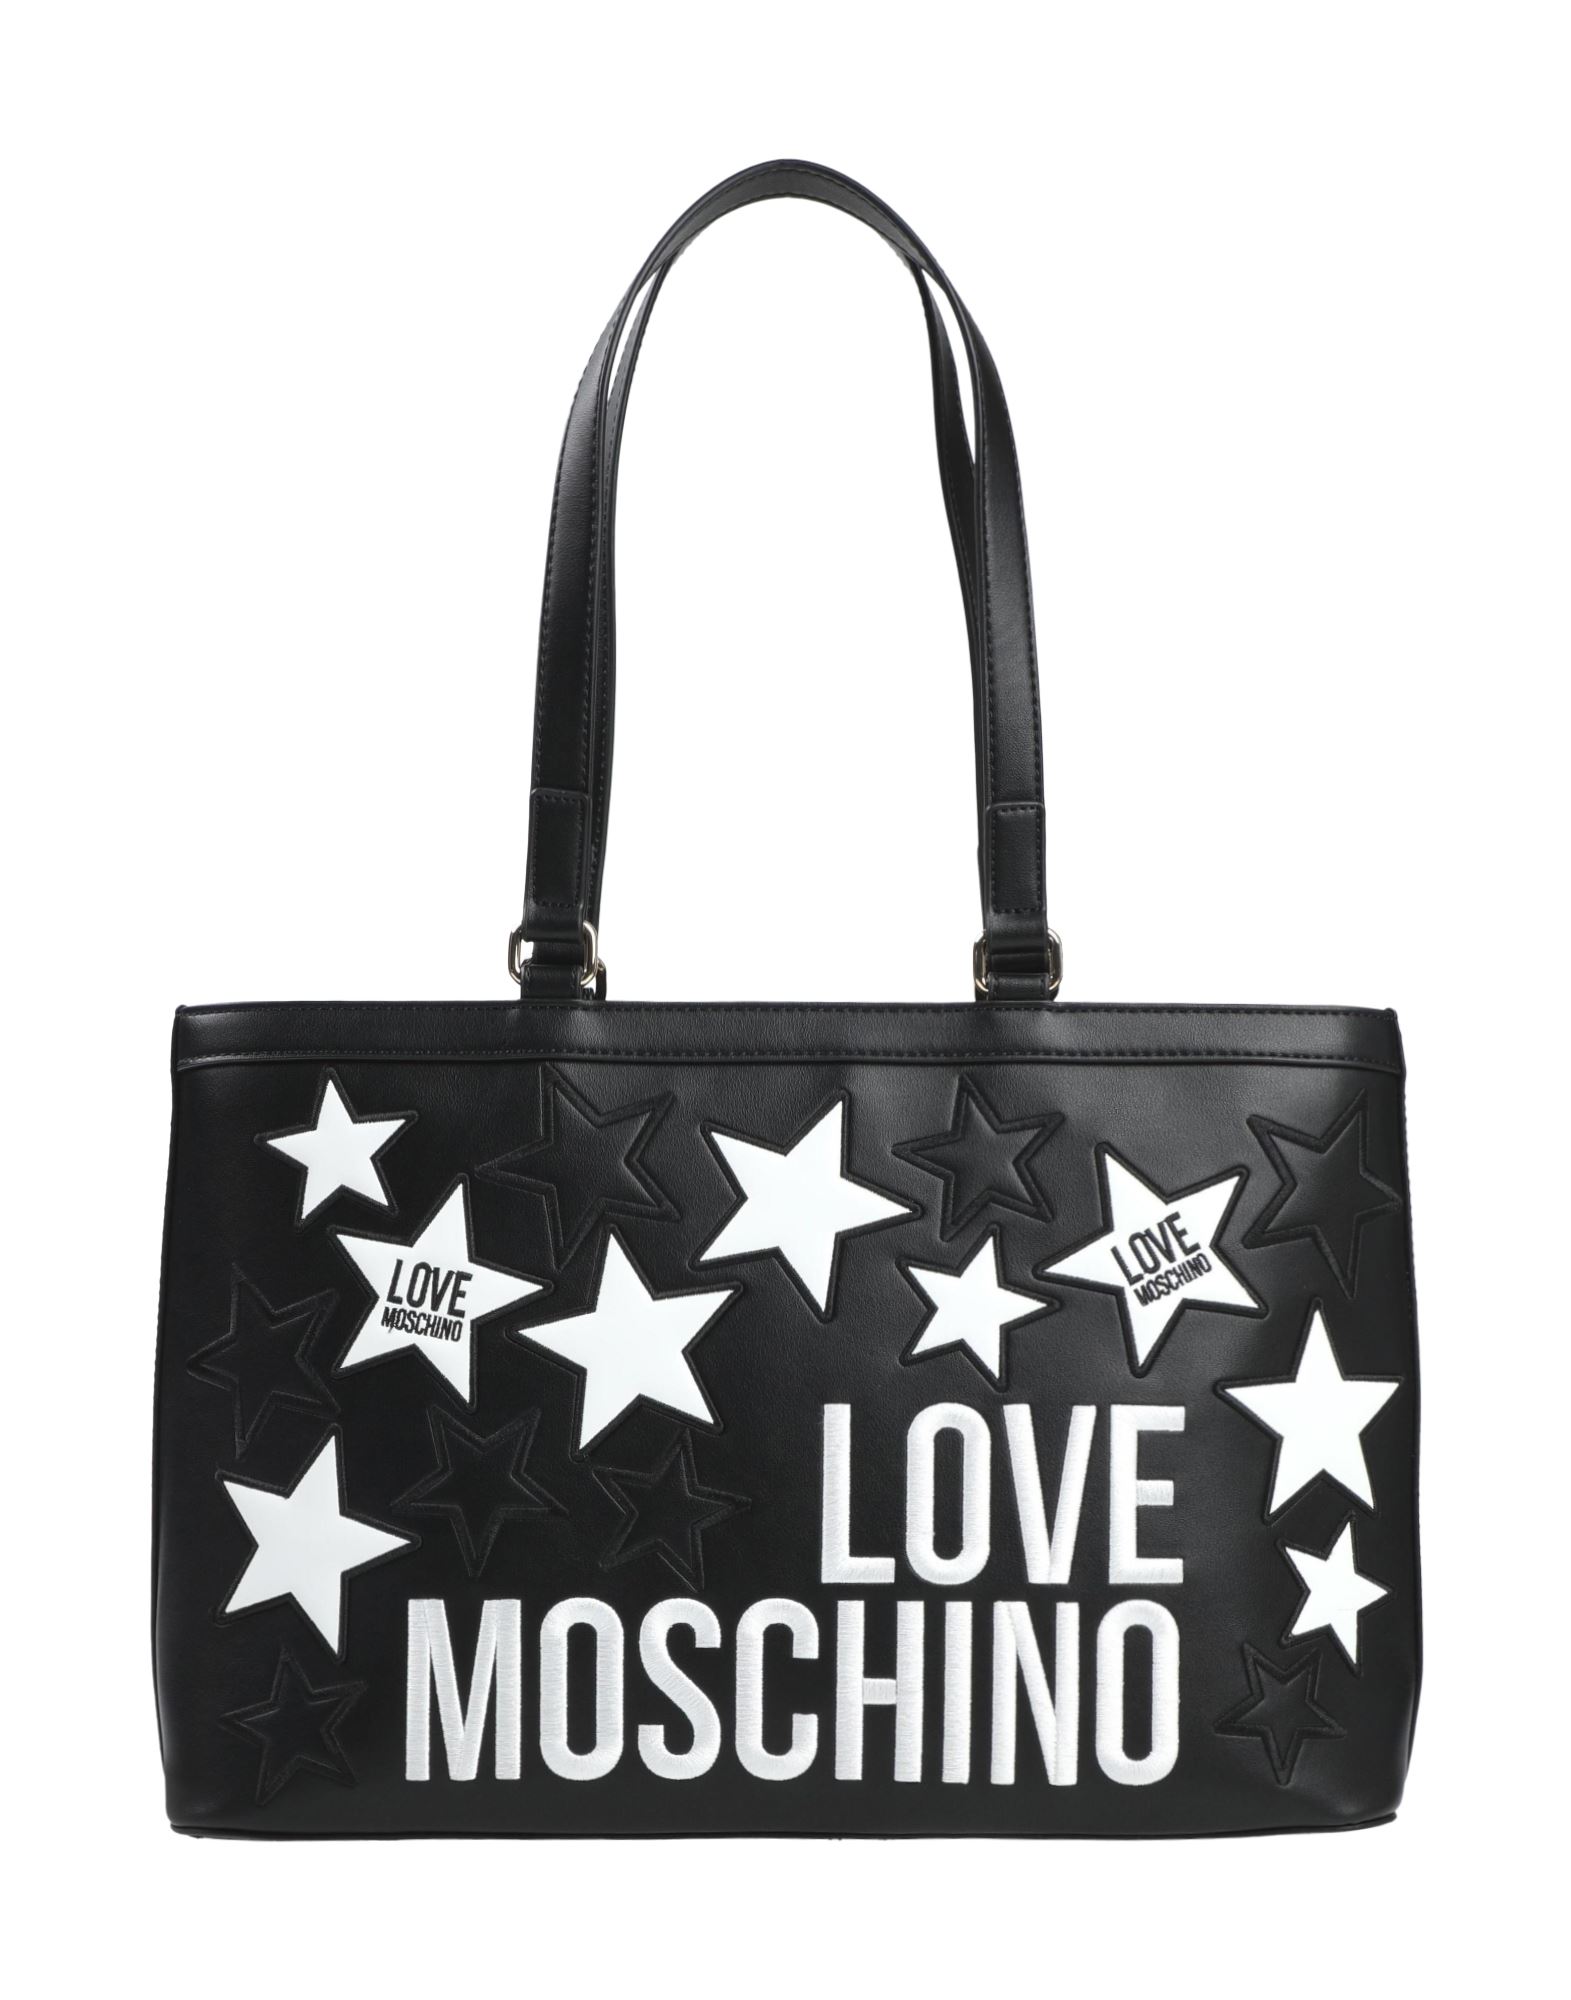 LOVE MOSCHINO Shoulder bags - Item 45552904